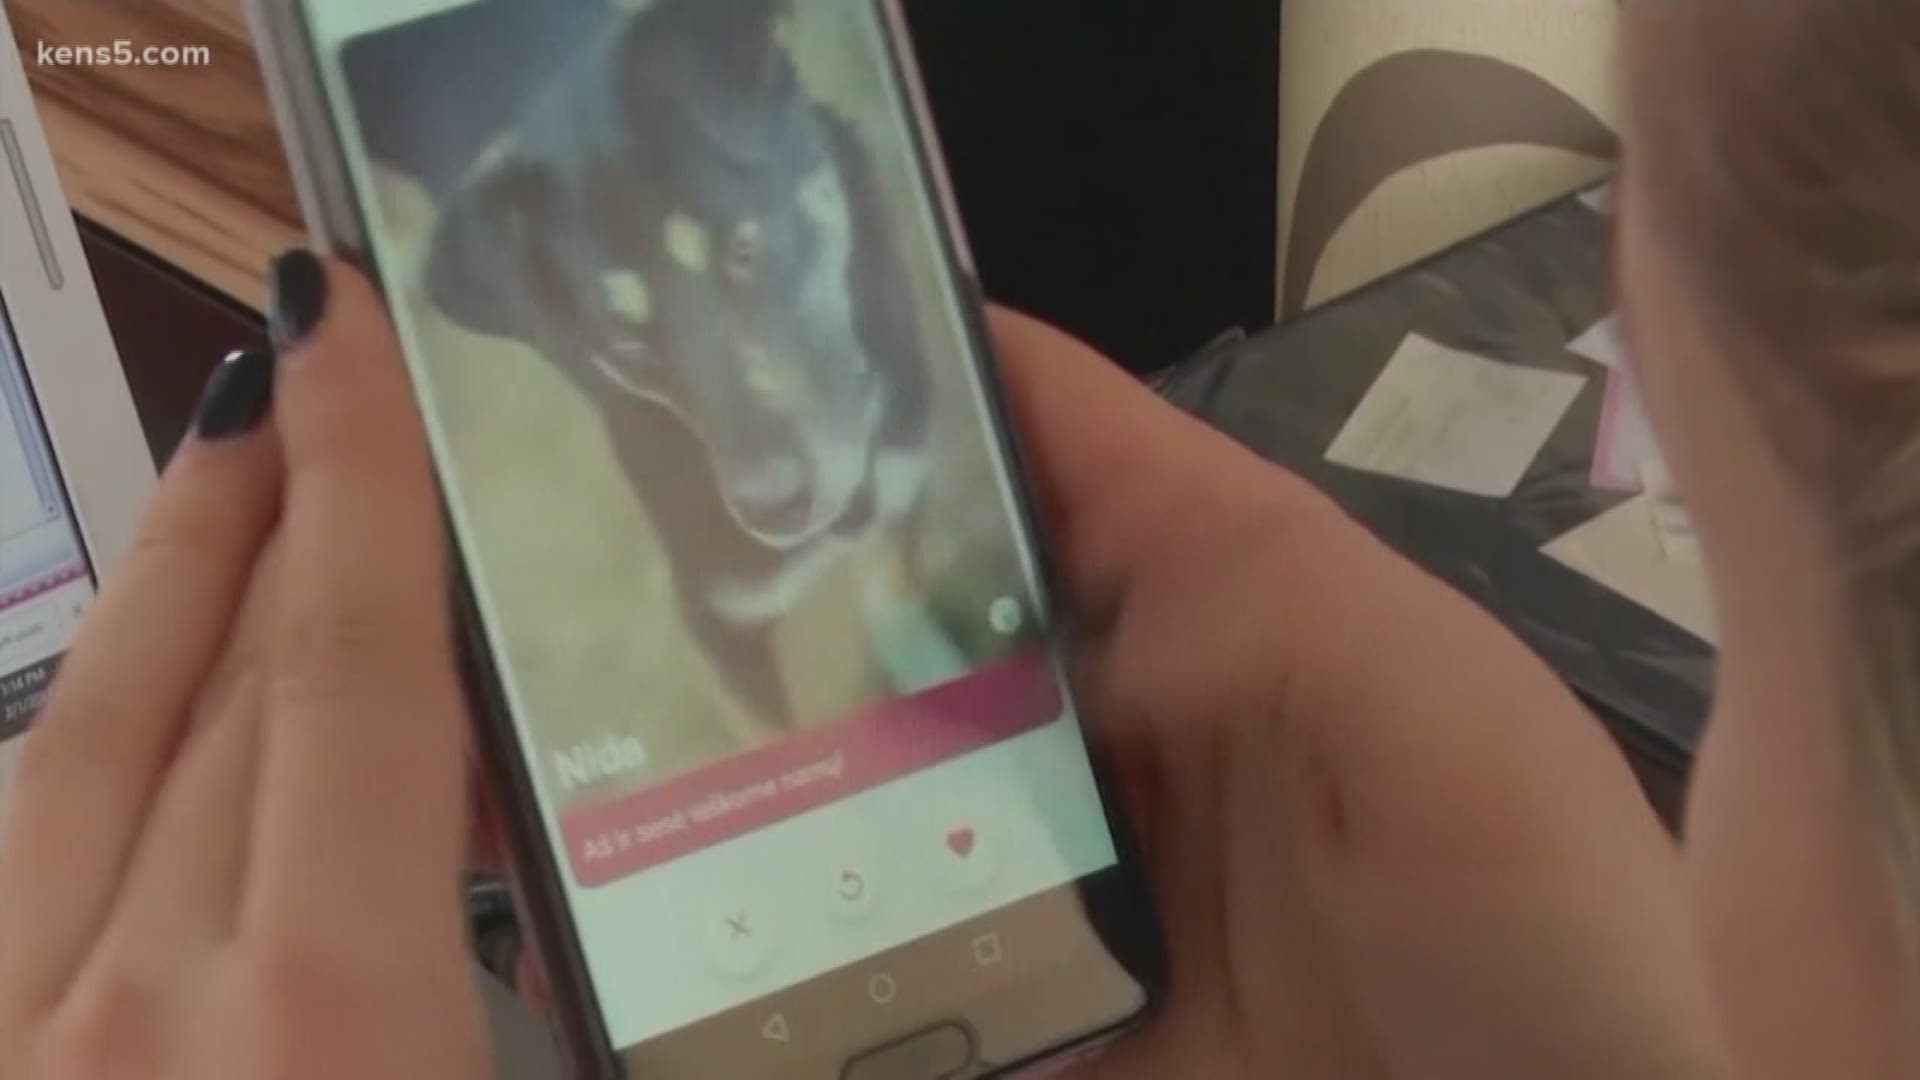 The service is called Get Pet, and it brings users photos of dogs complete with their own curated profiles.